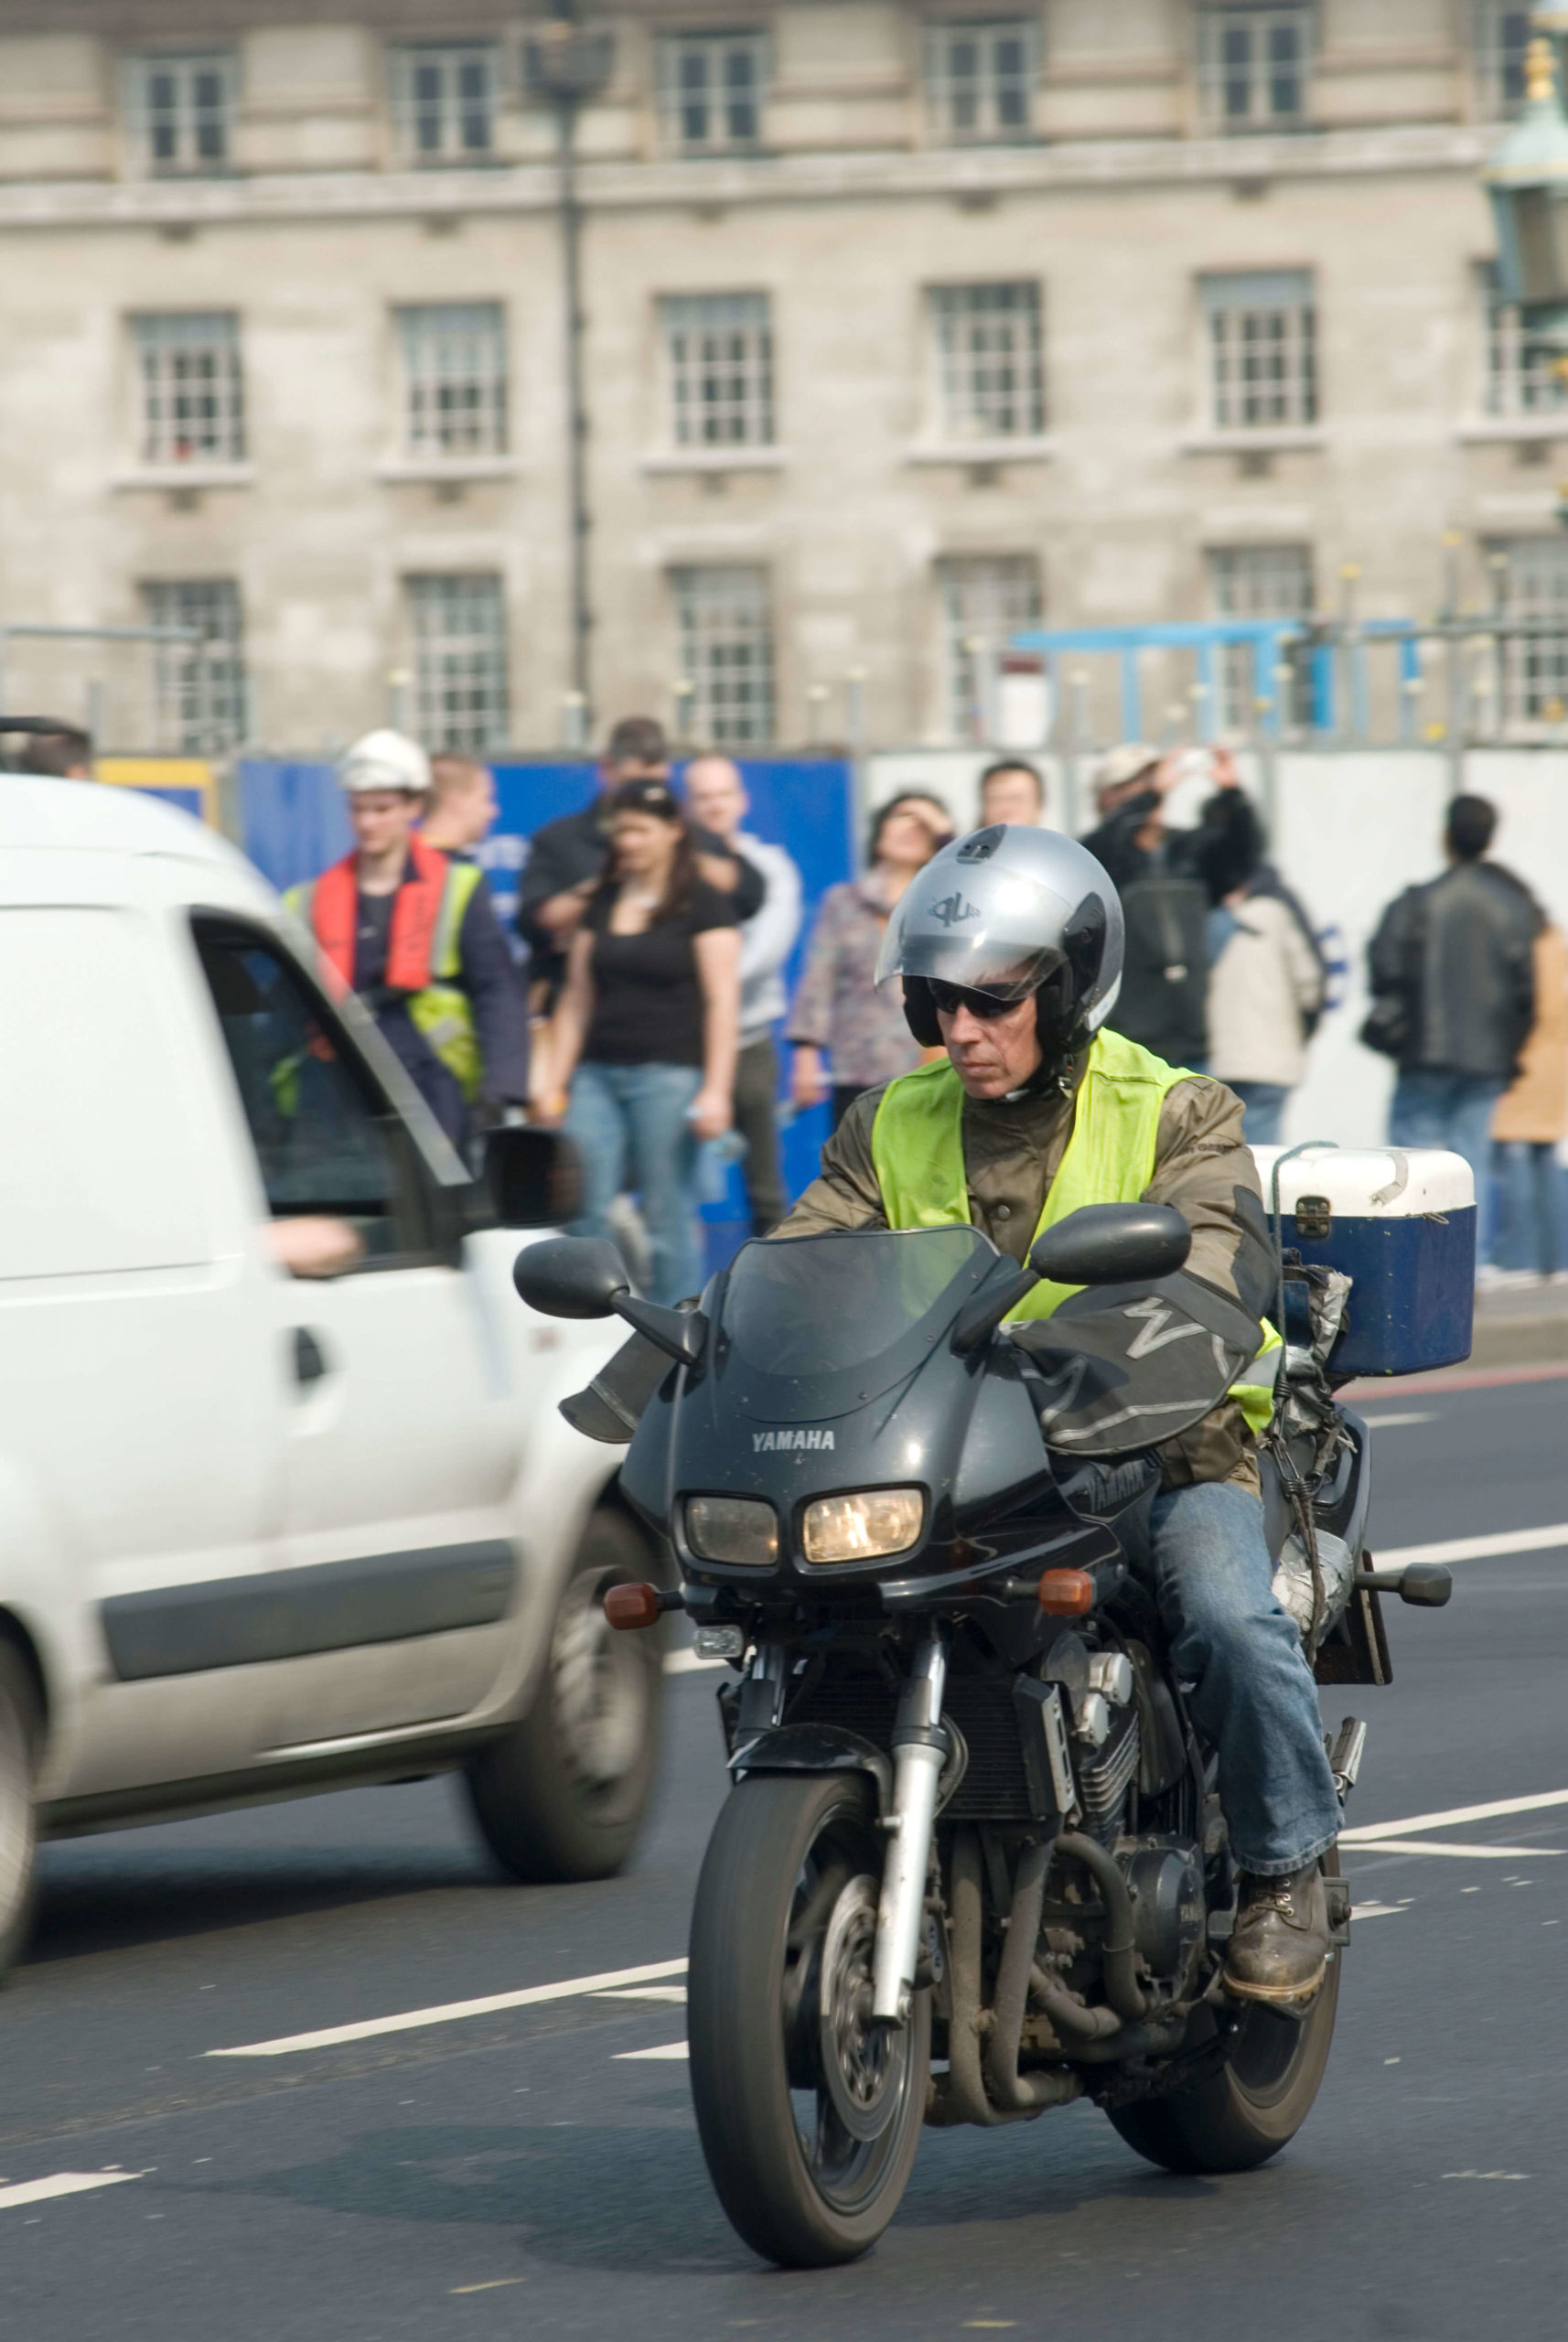 Motorcycle courier traveling in London traffic, England